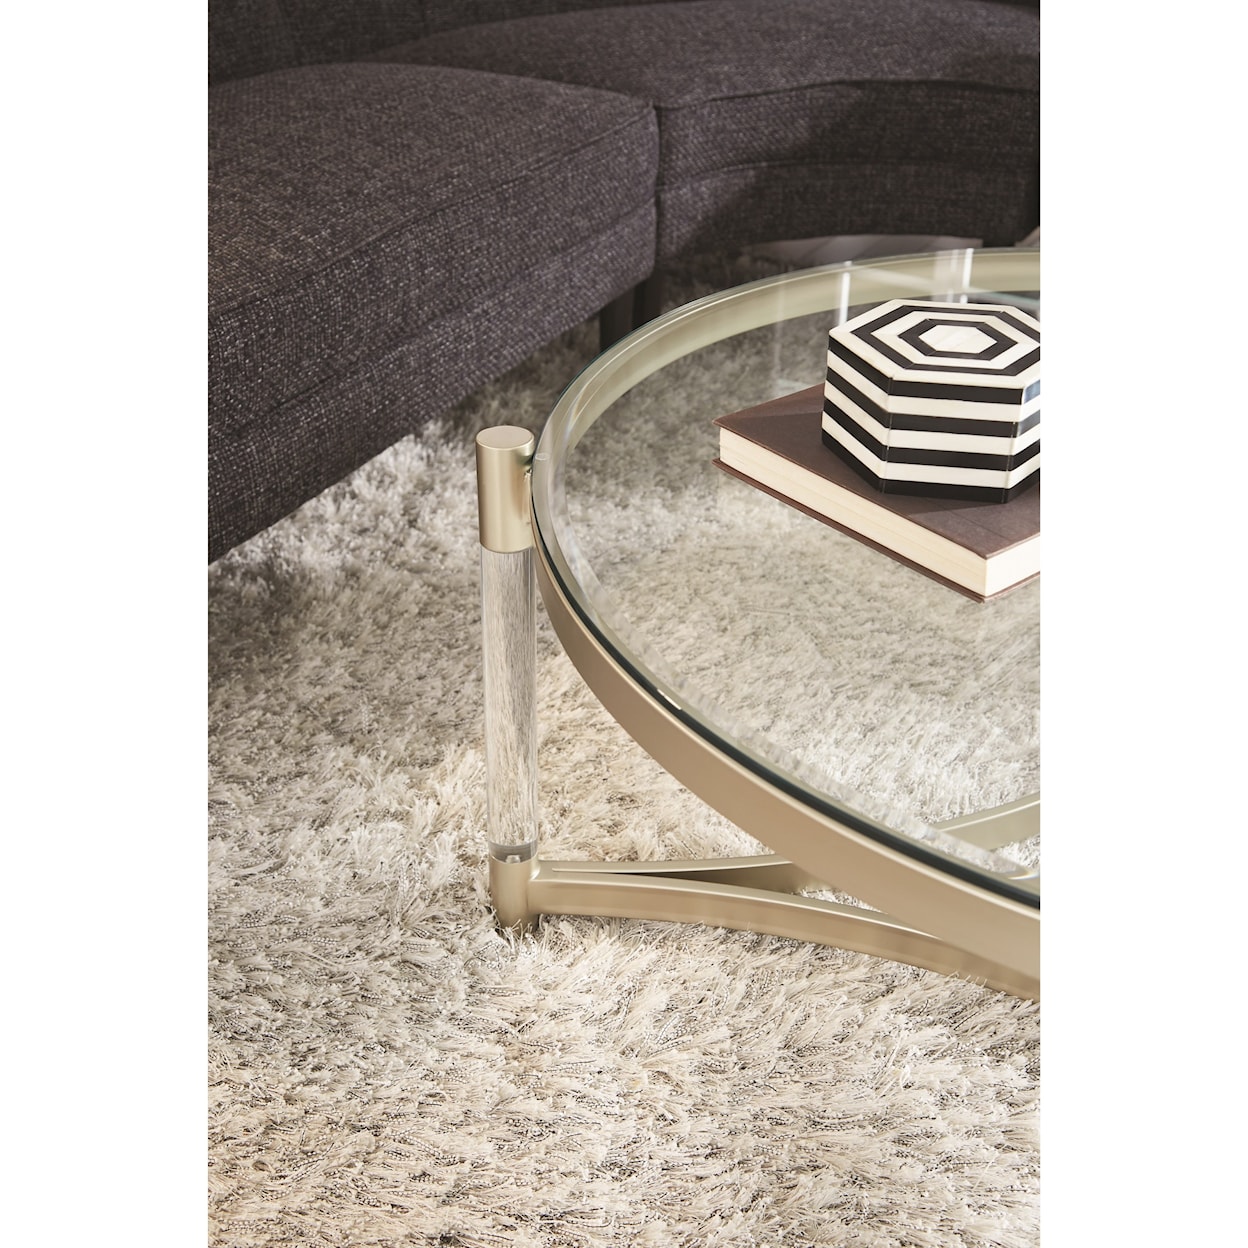 Magnussen Home Silas Occasional Tables Round Cocktail Table